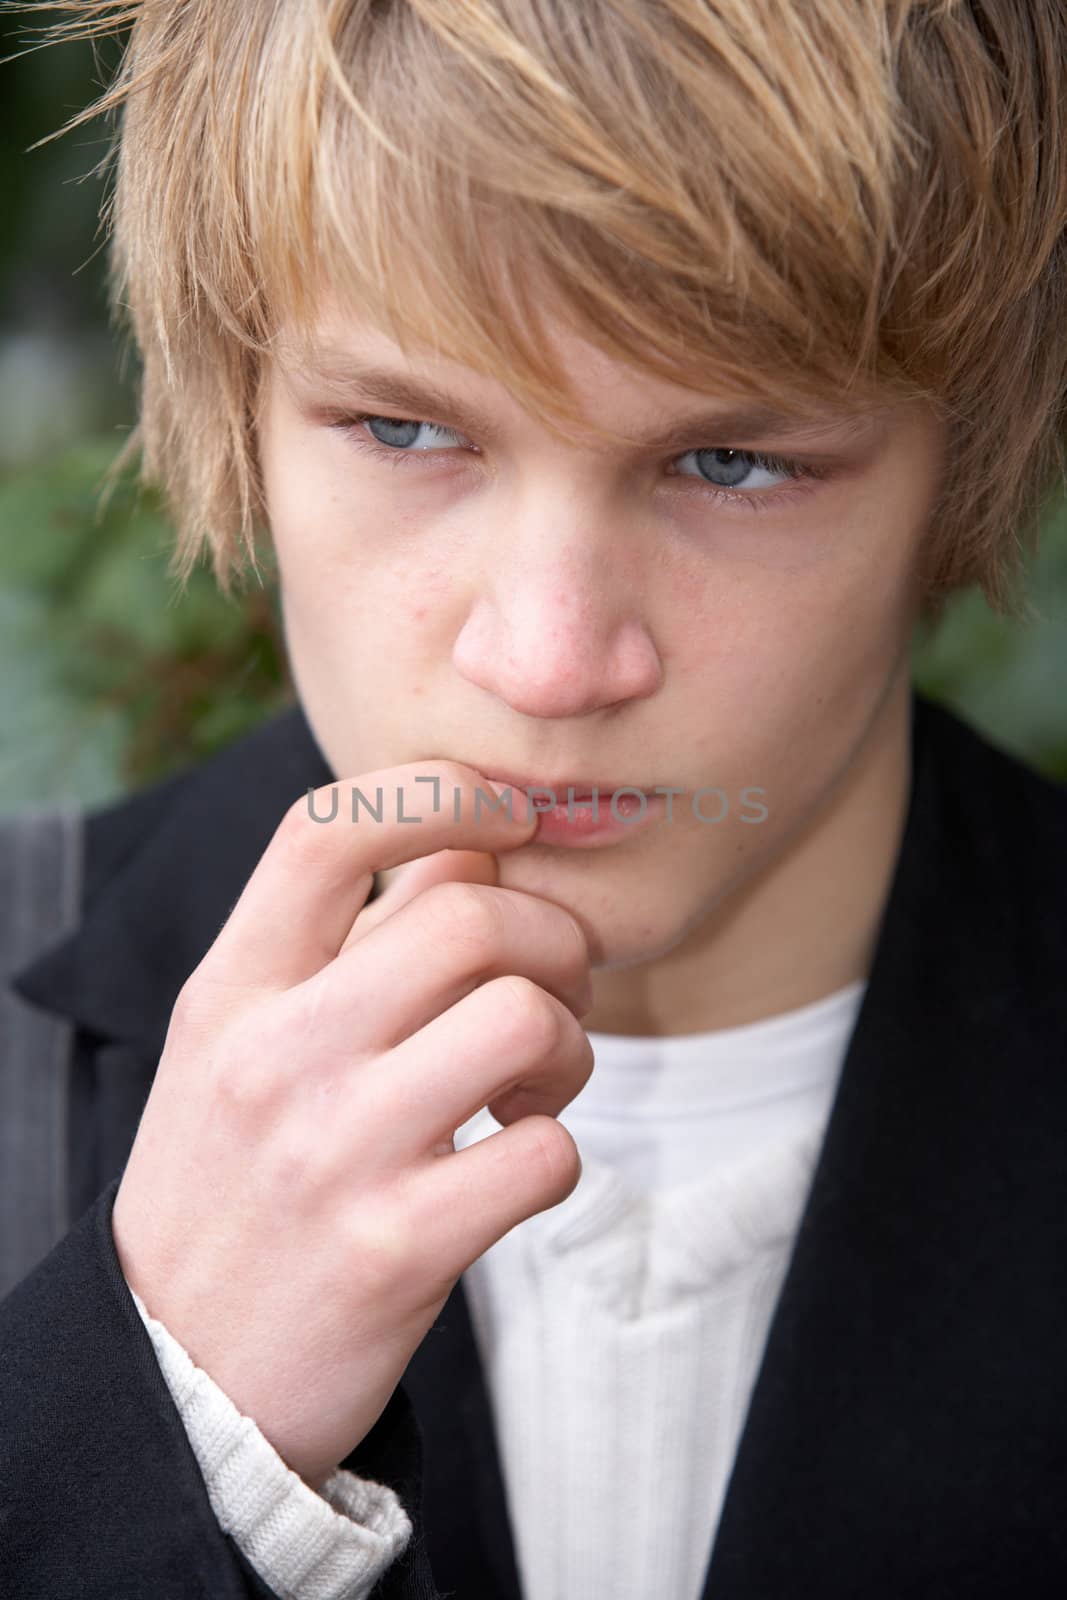 Teenage boy contemplating in city park, frontal close-up